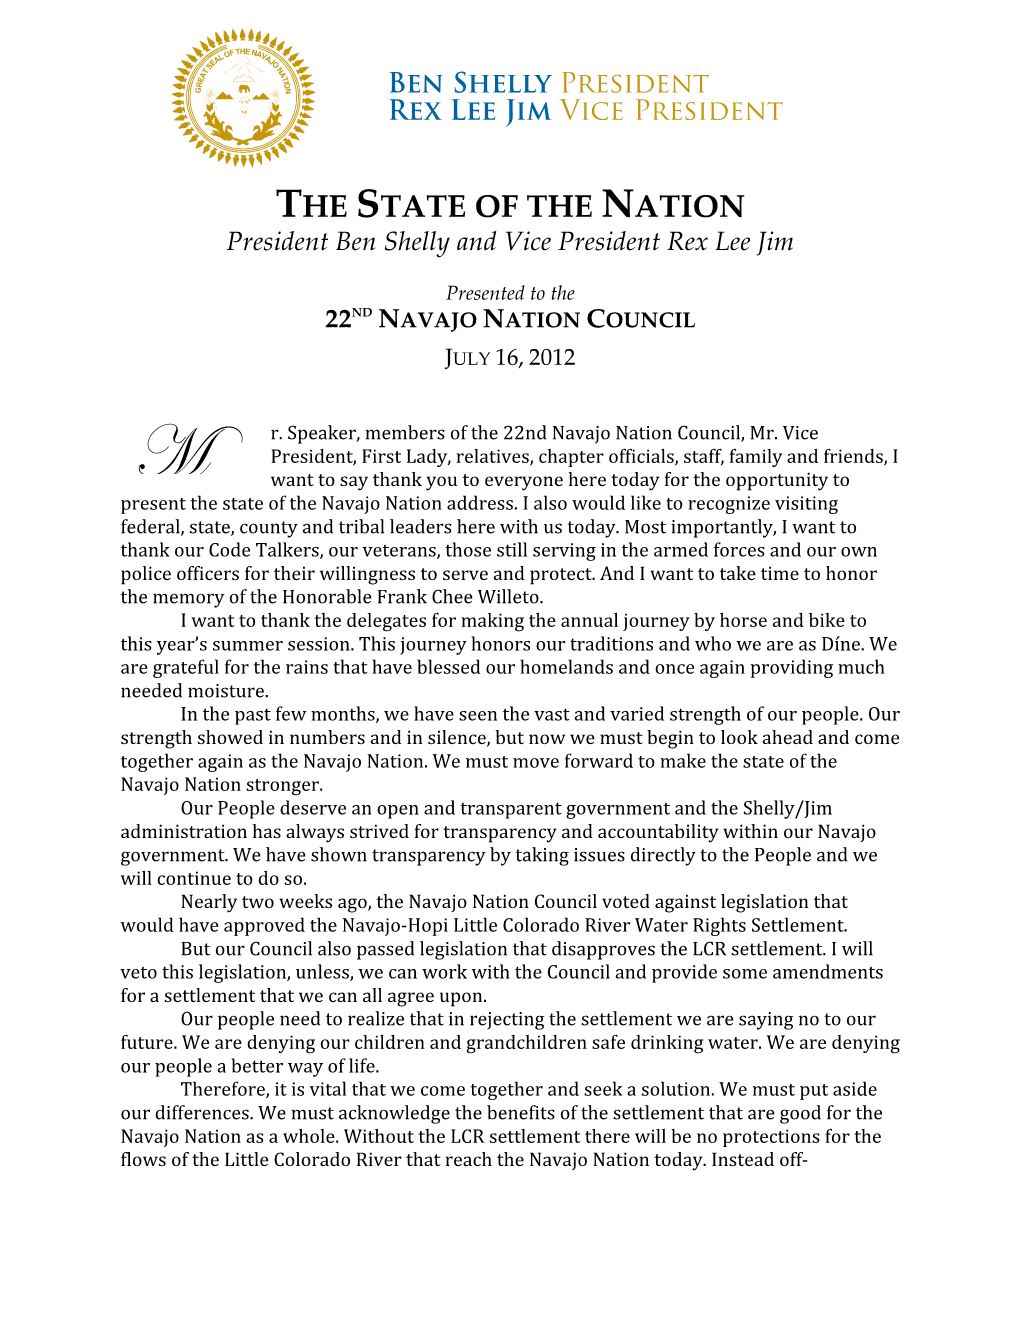 FINAL DRAFT Summer 2012 State of the Nation